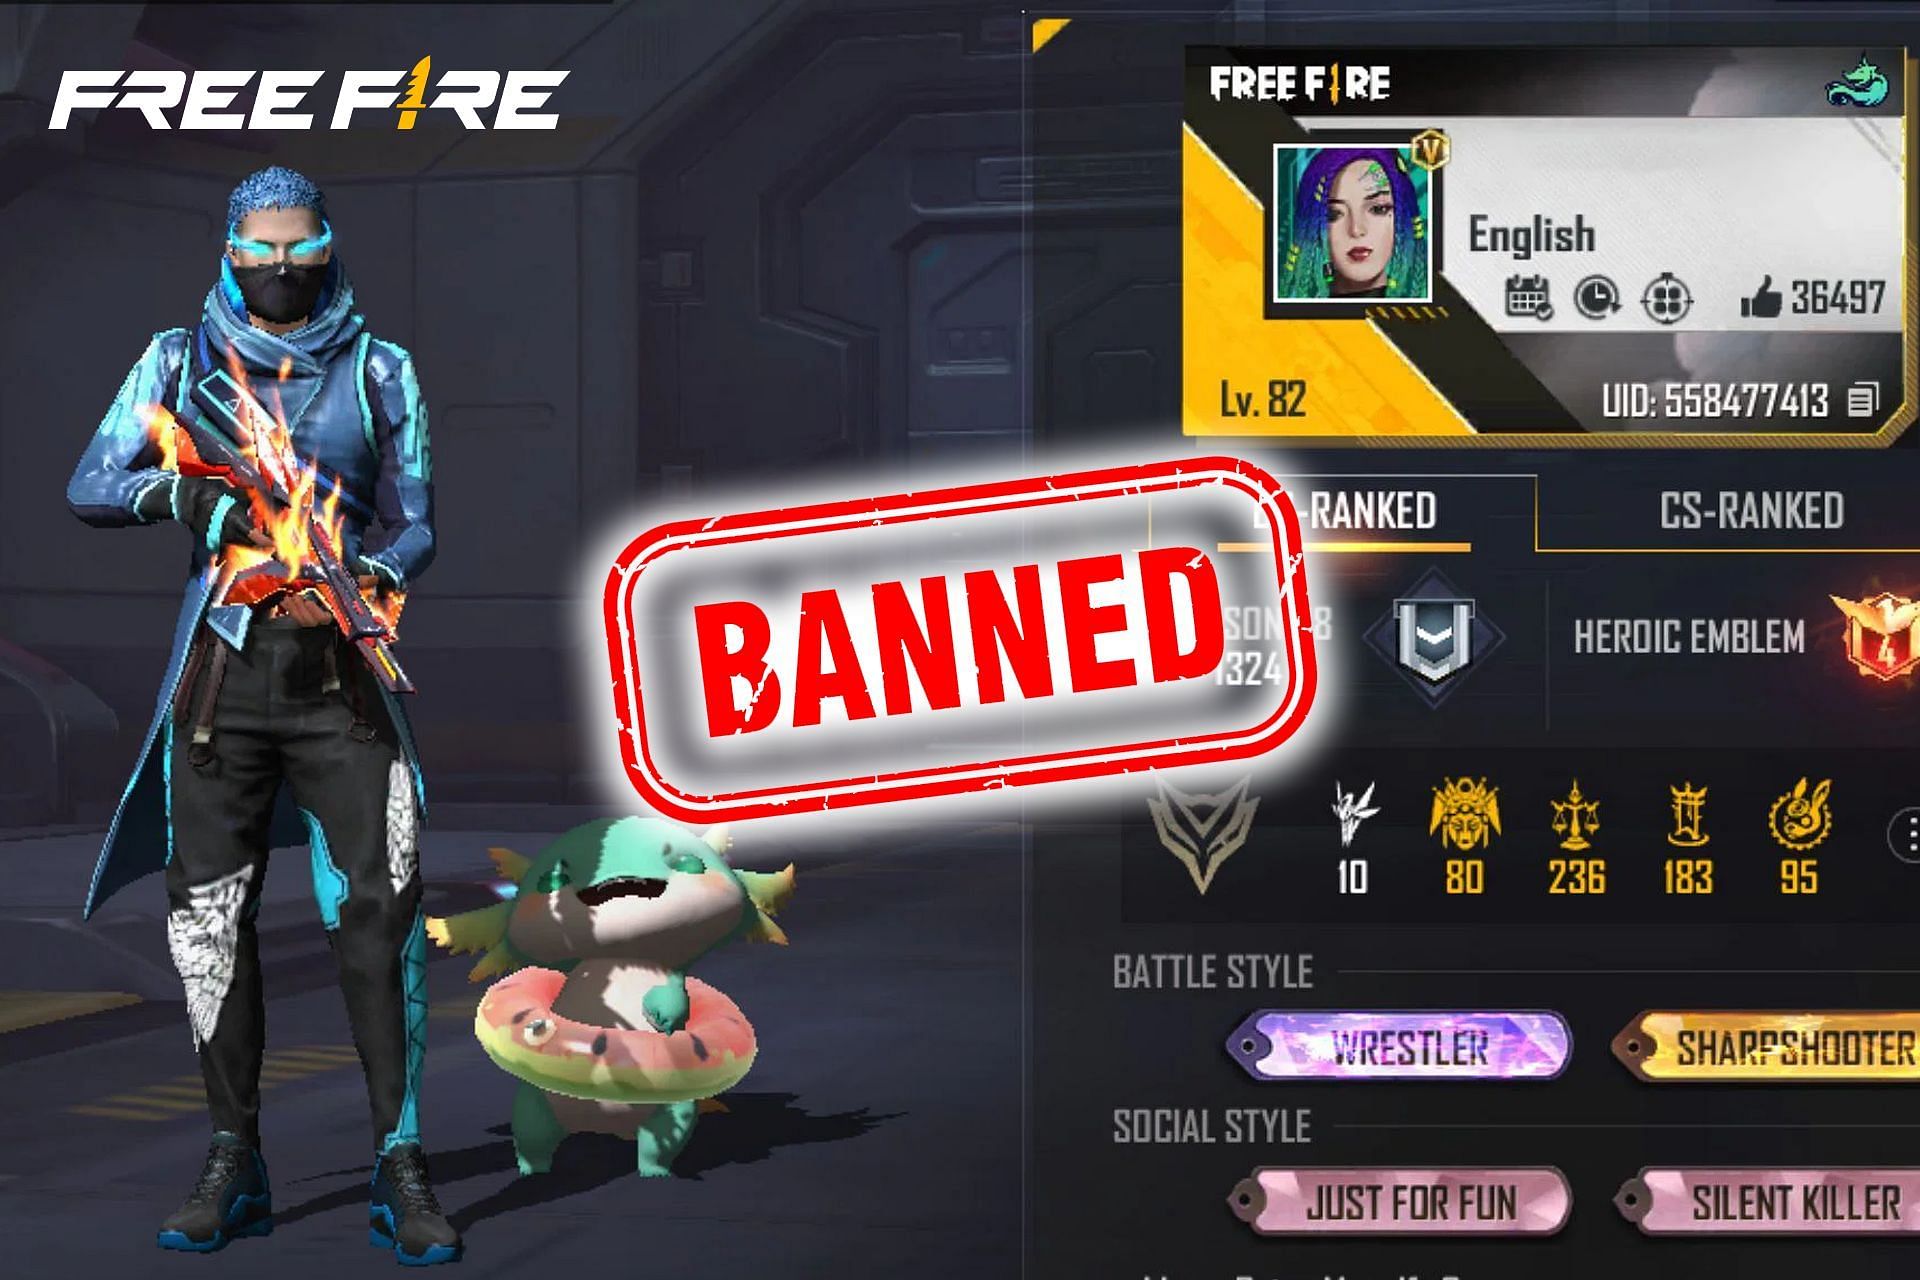 Free Fire IDs can get banned by developers for numerous reasons (Image via Sportskeeda)